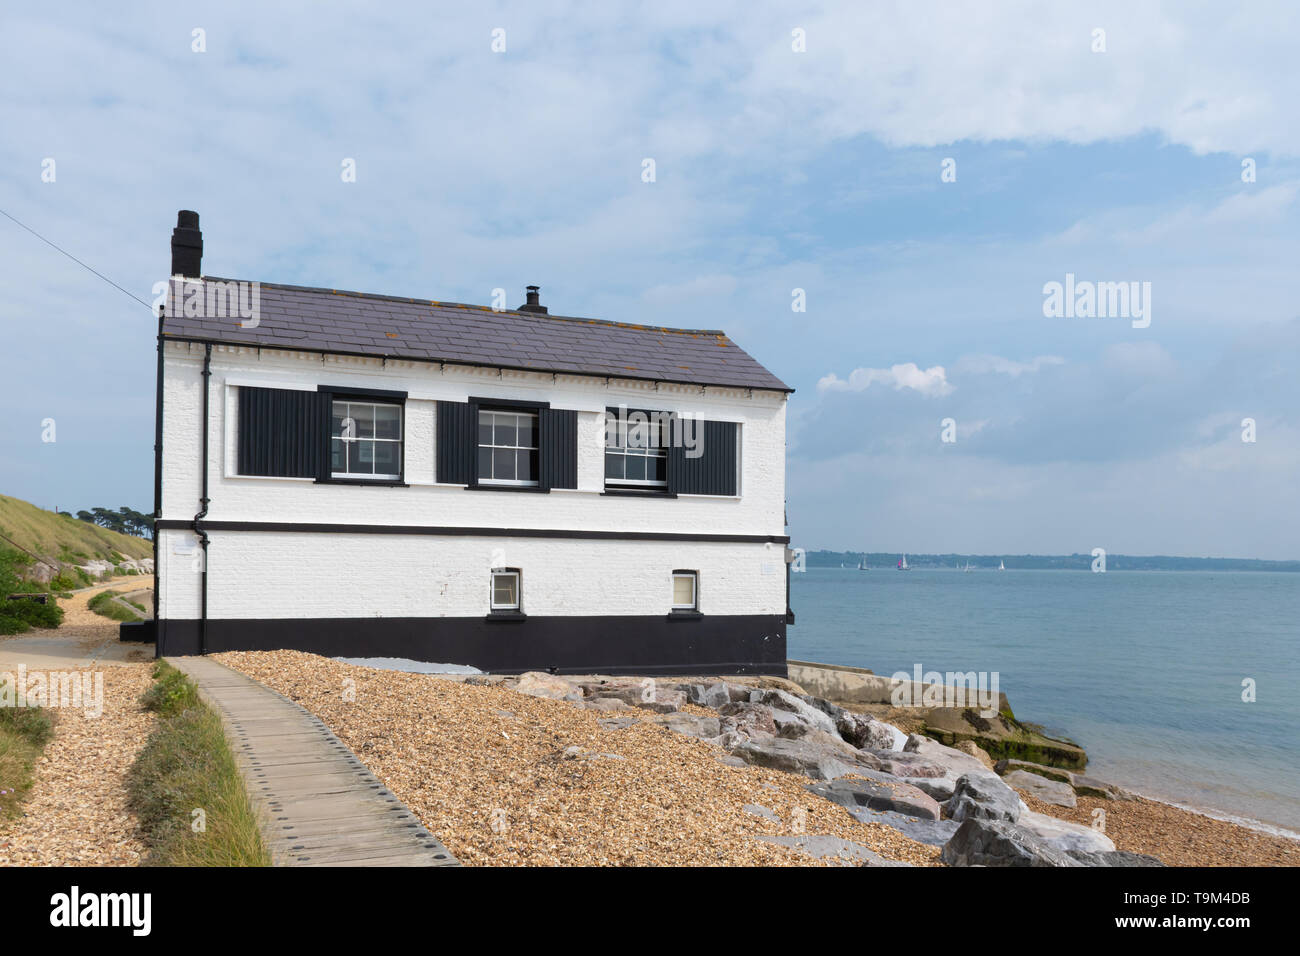 The Watch House built by the coastguard, completed in 1828, on Lepe Beach on the south coast of Hampshire, UK Stock Photo